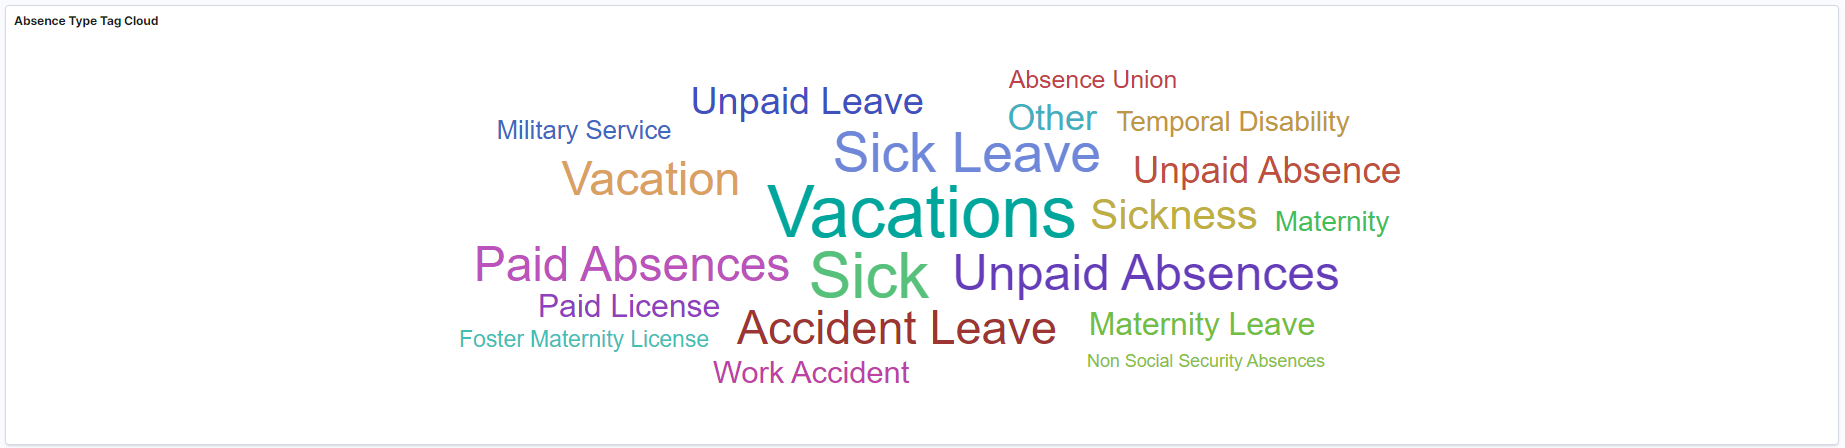 Absence Type Tag Cloud